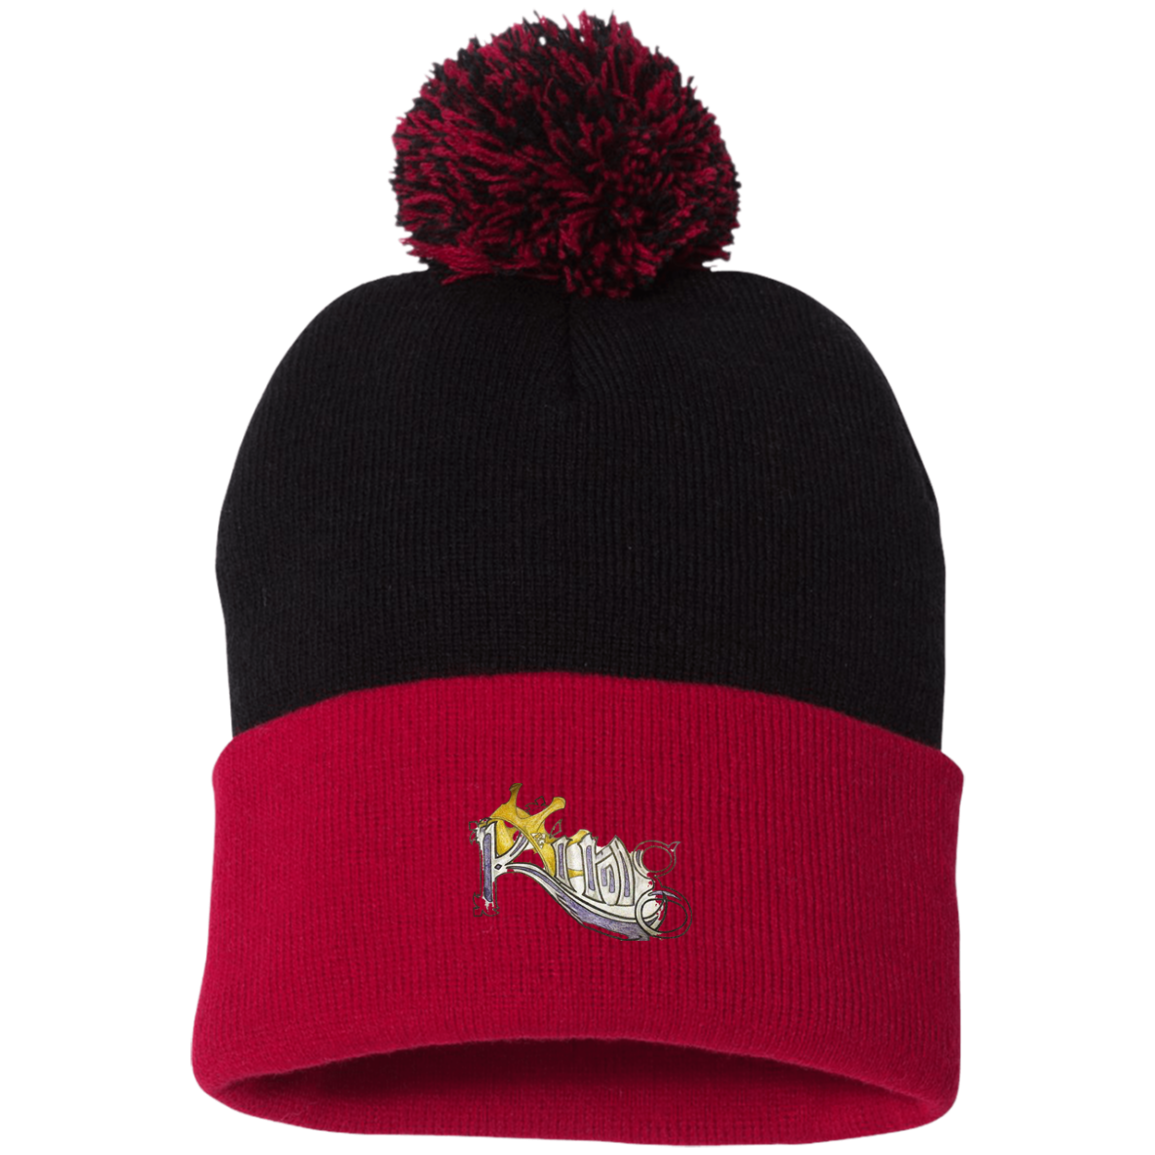 King Pom Knit Cap by Amagiri Young